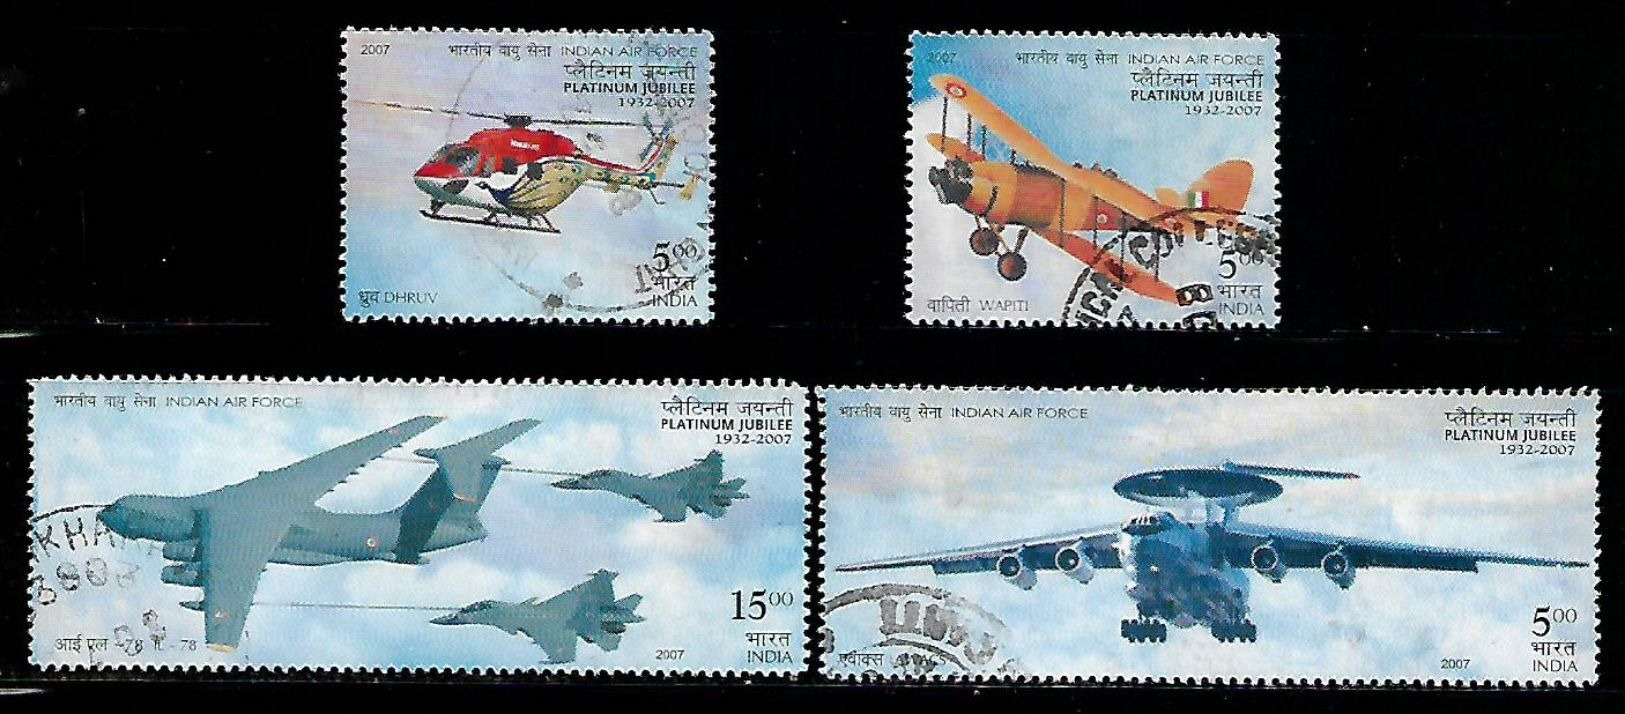 India 2007 Platinum Jubilee Of Indian Air Force Helicopter Airplane Aviation Used Stamp # A:134 - Used Stamps